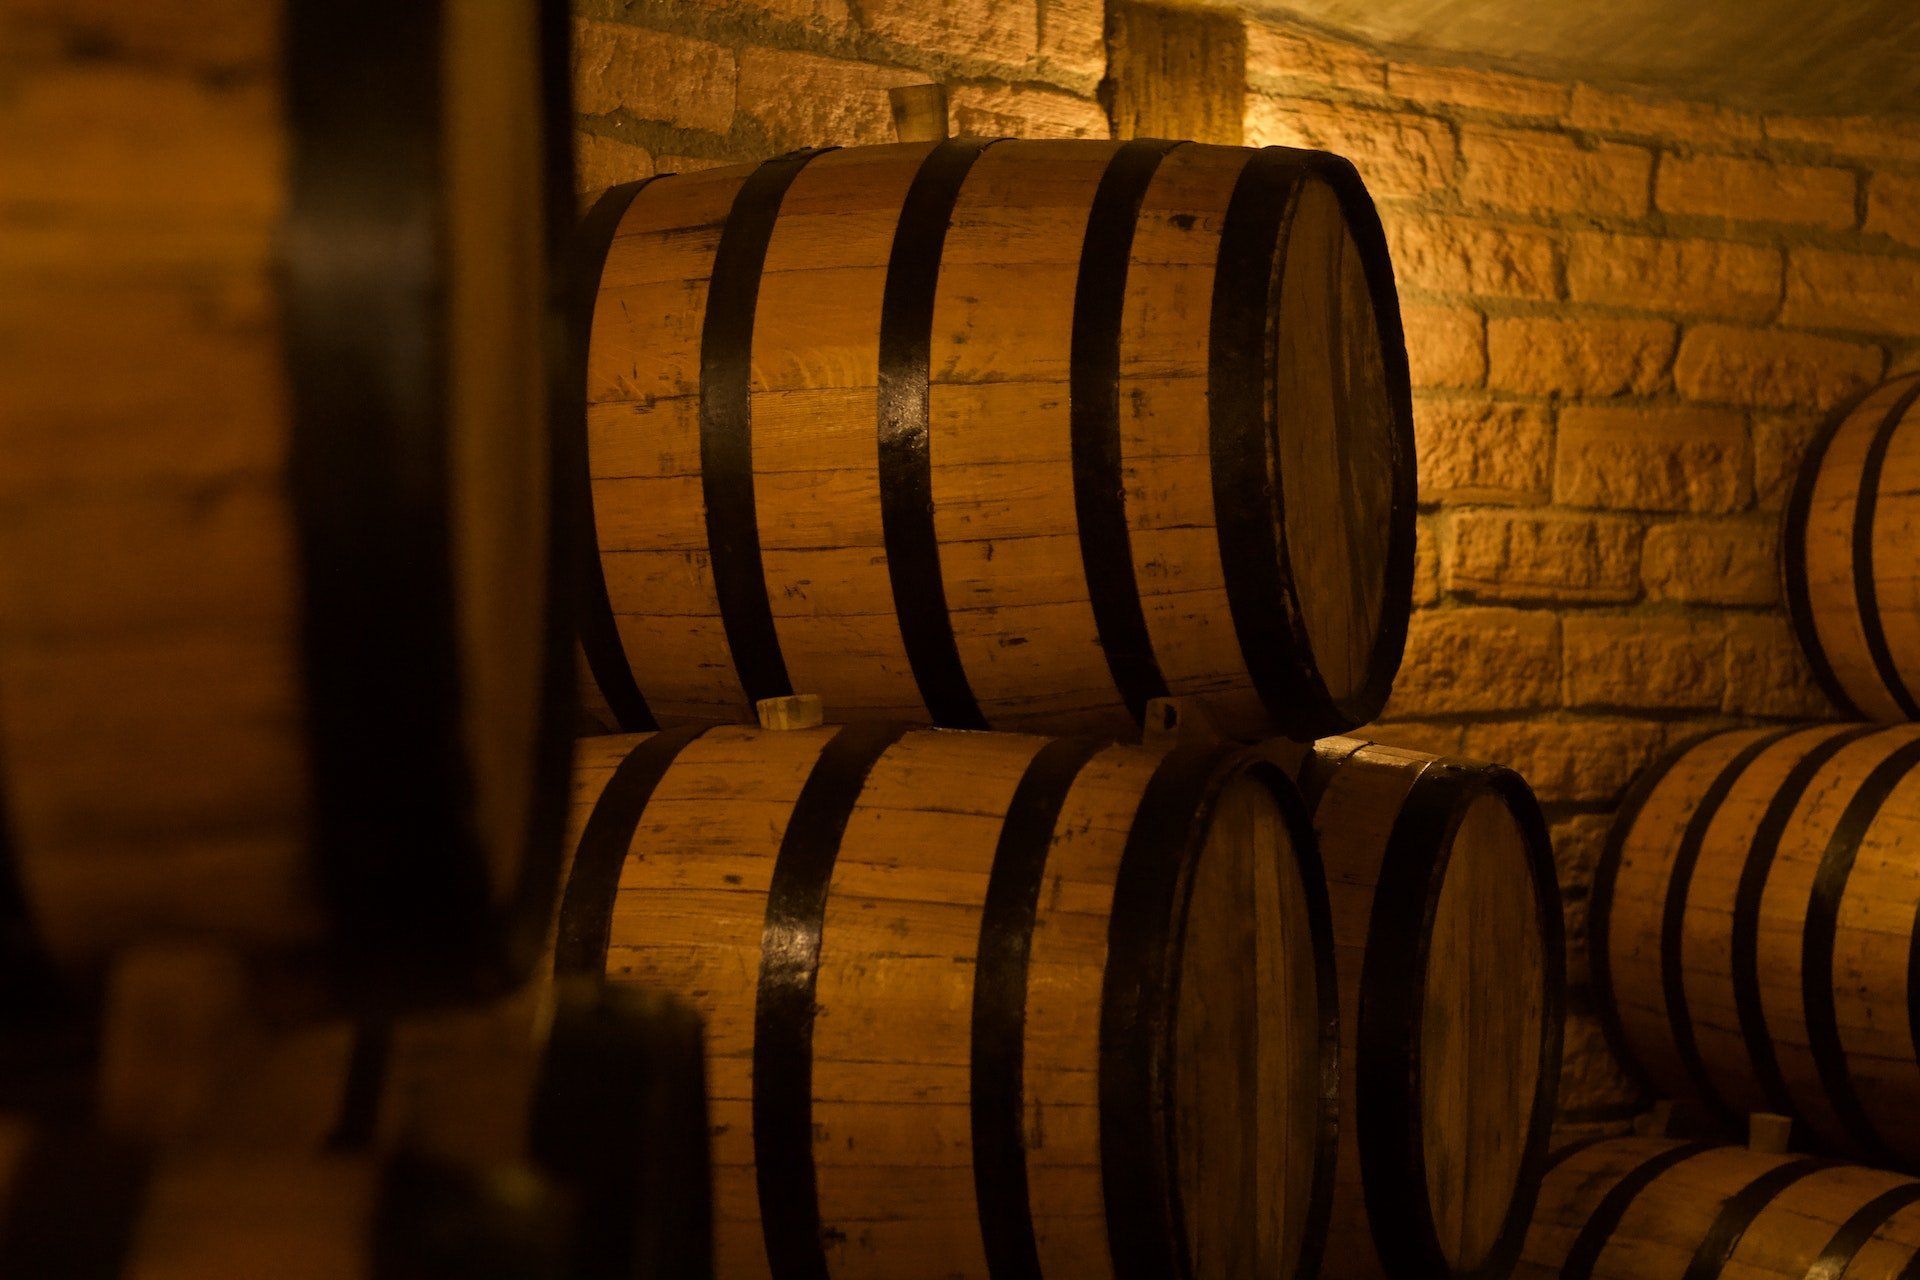 a row of wooden barrels stacked on top of each other in a wine cellar .